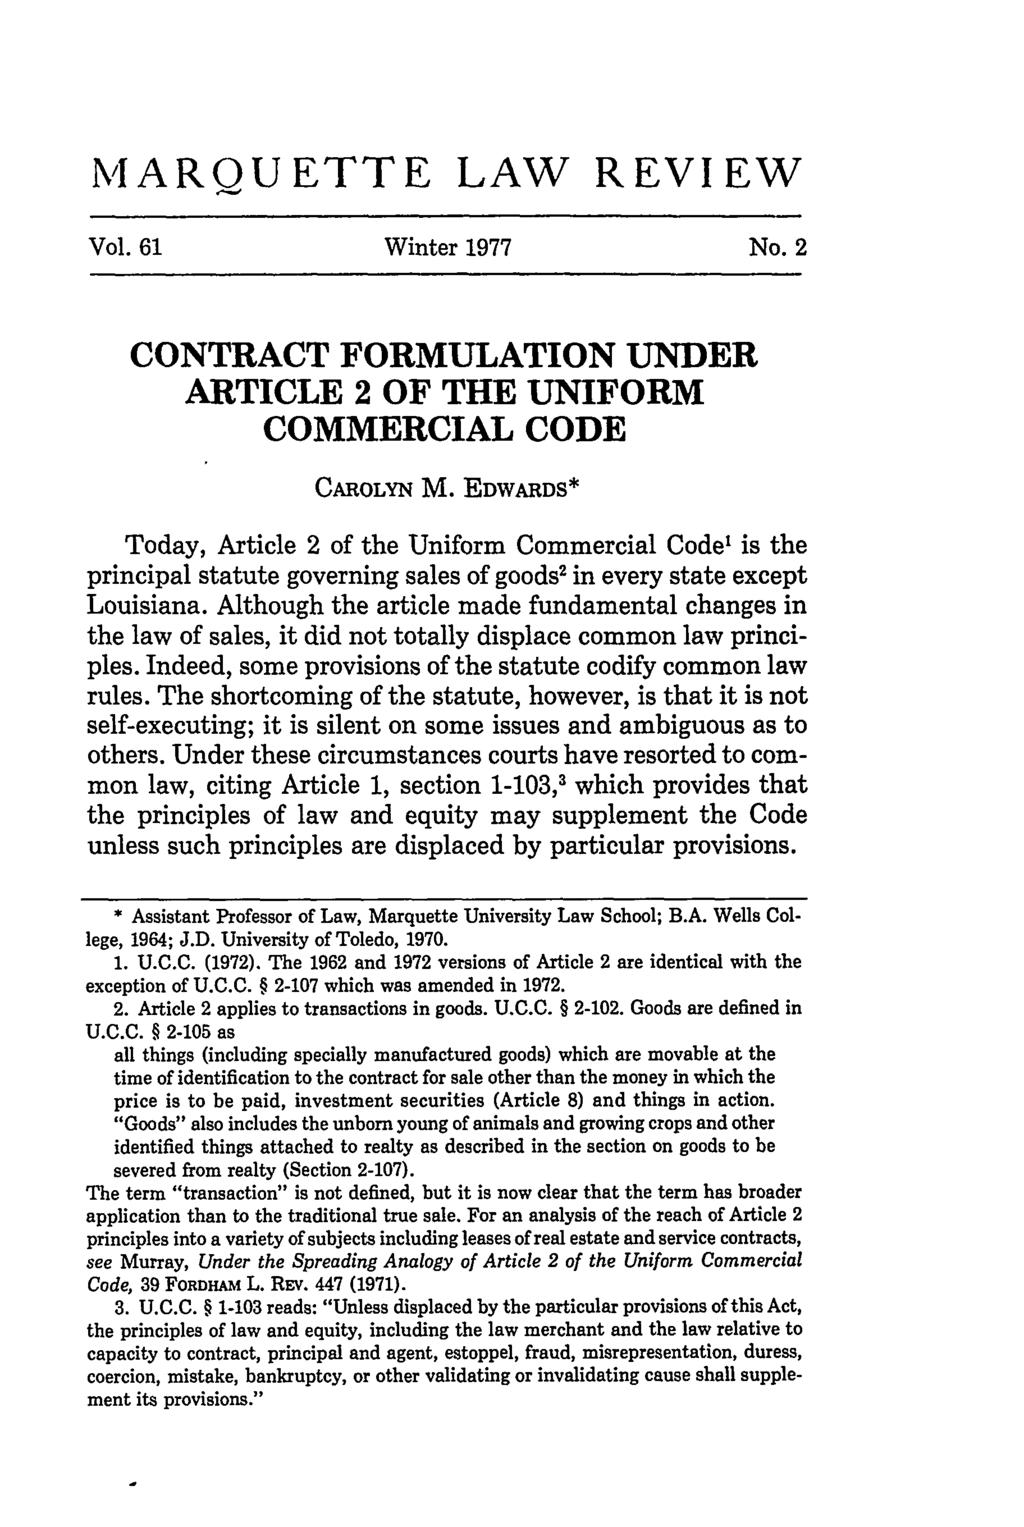 MARQUETTE LAW REVIEW Vol. 61 Winter 1977 No. 2 CONTRACT FORMULATION UNDER ARTICLE 2 OF THE UNIFORM COMMERCIAL CODE CAROLYN M.